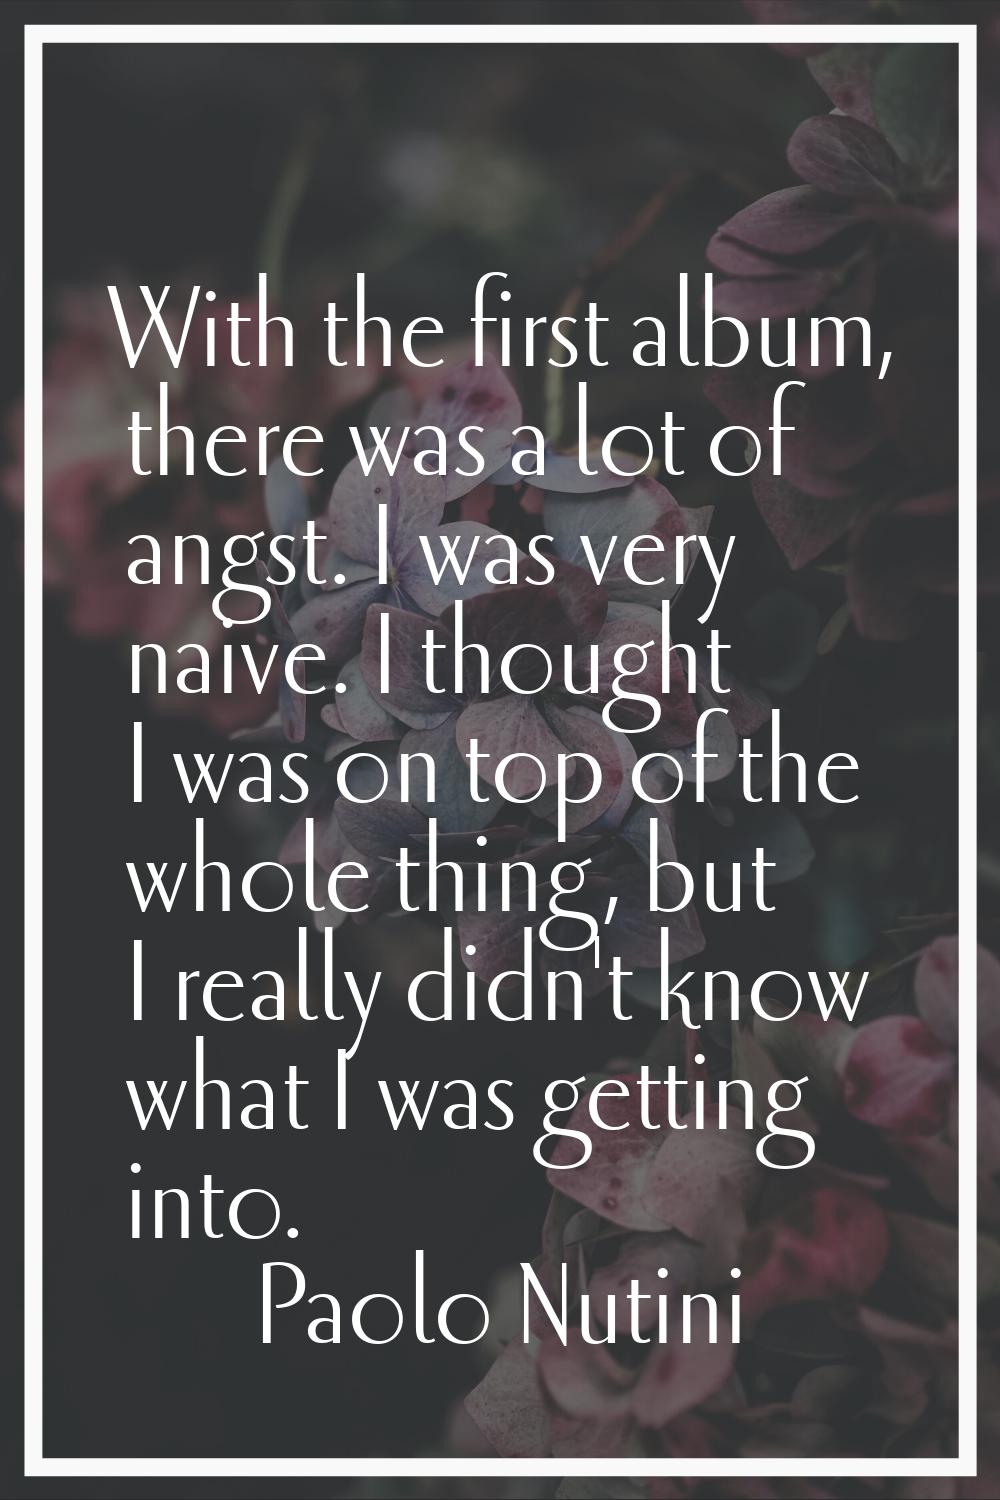 With the first album, there was a lot of angst. I was very naive. I thought I was on top of the who